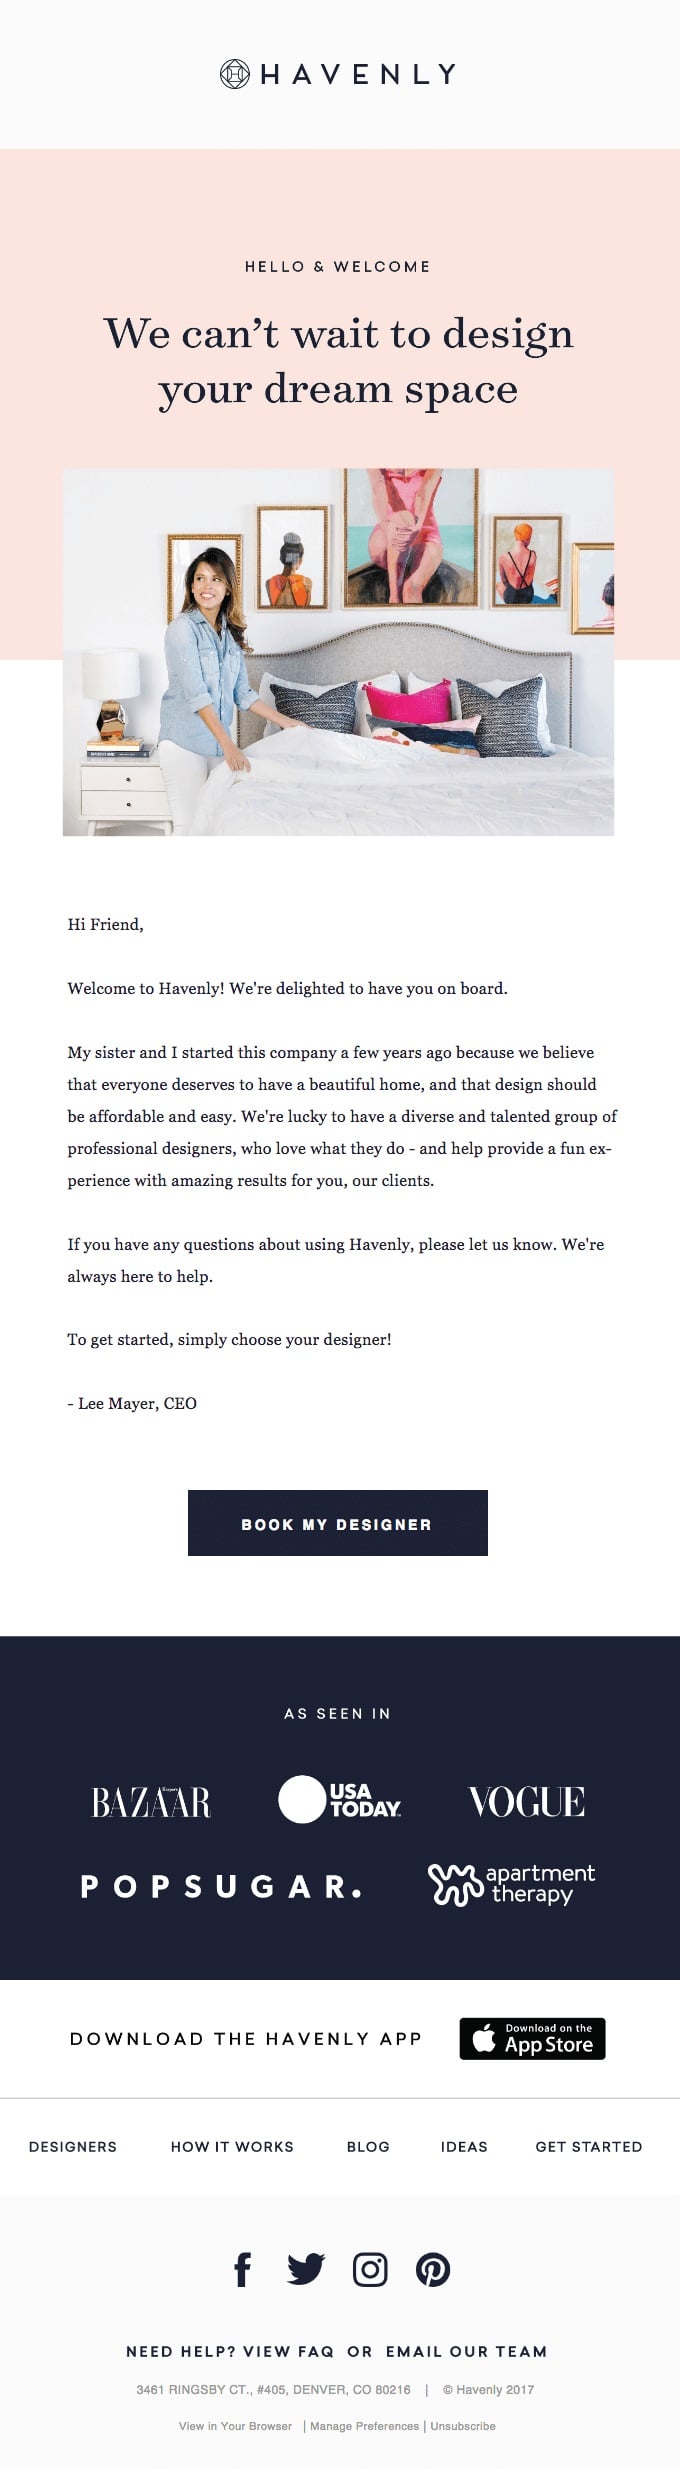 Havenly is another brand that proves you don’t need a long welcome email to get your point across. 